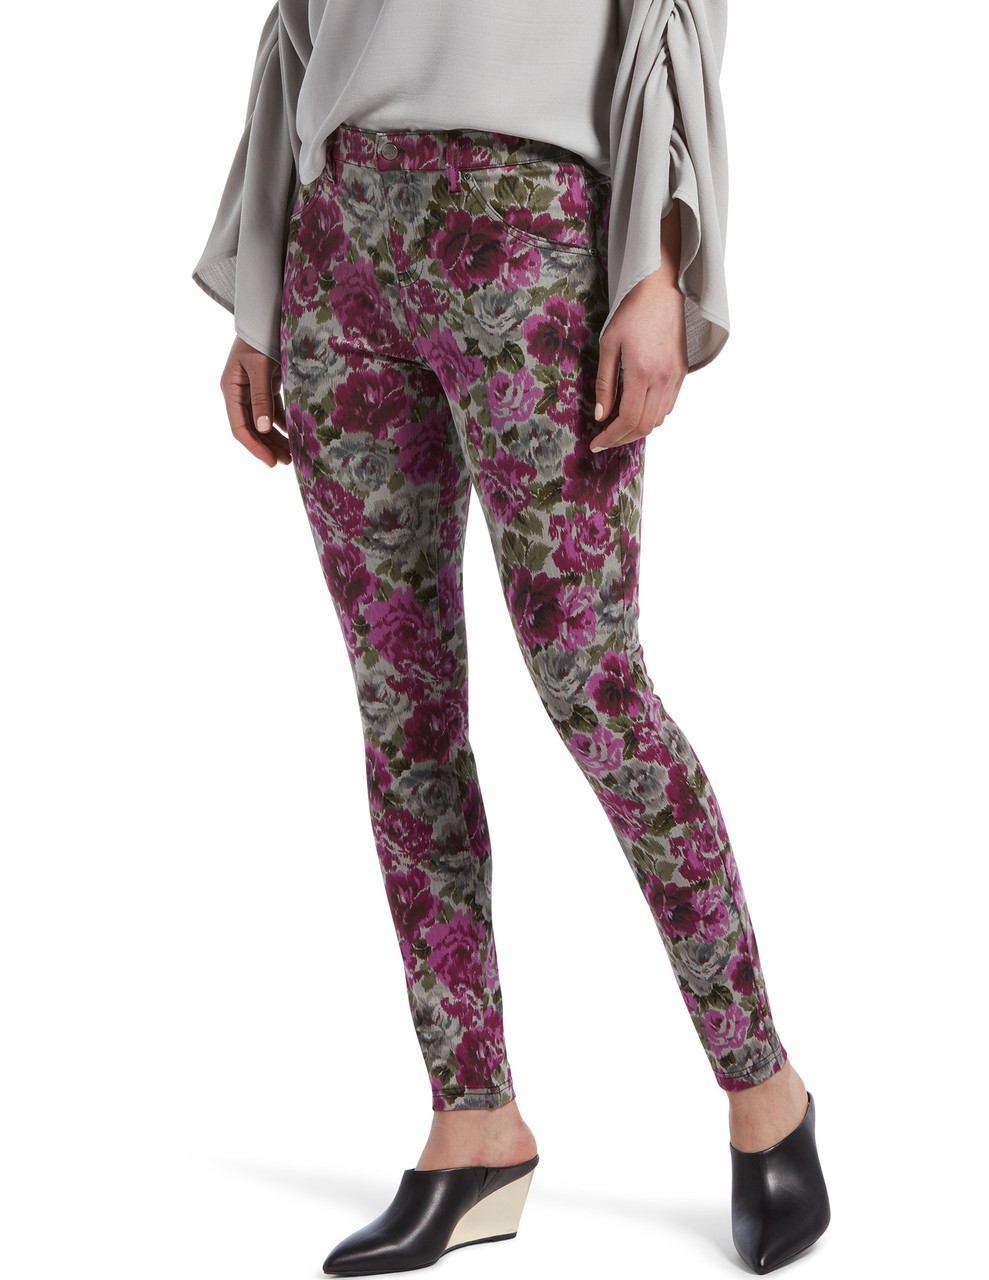 Fall Prints.  Floral leggings outfit, Fashion, Outfits with leggings